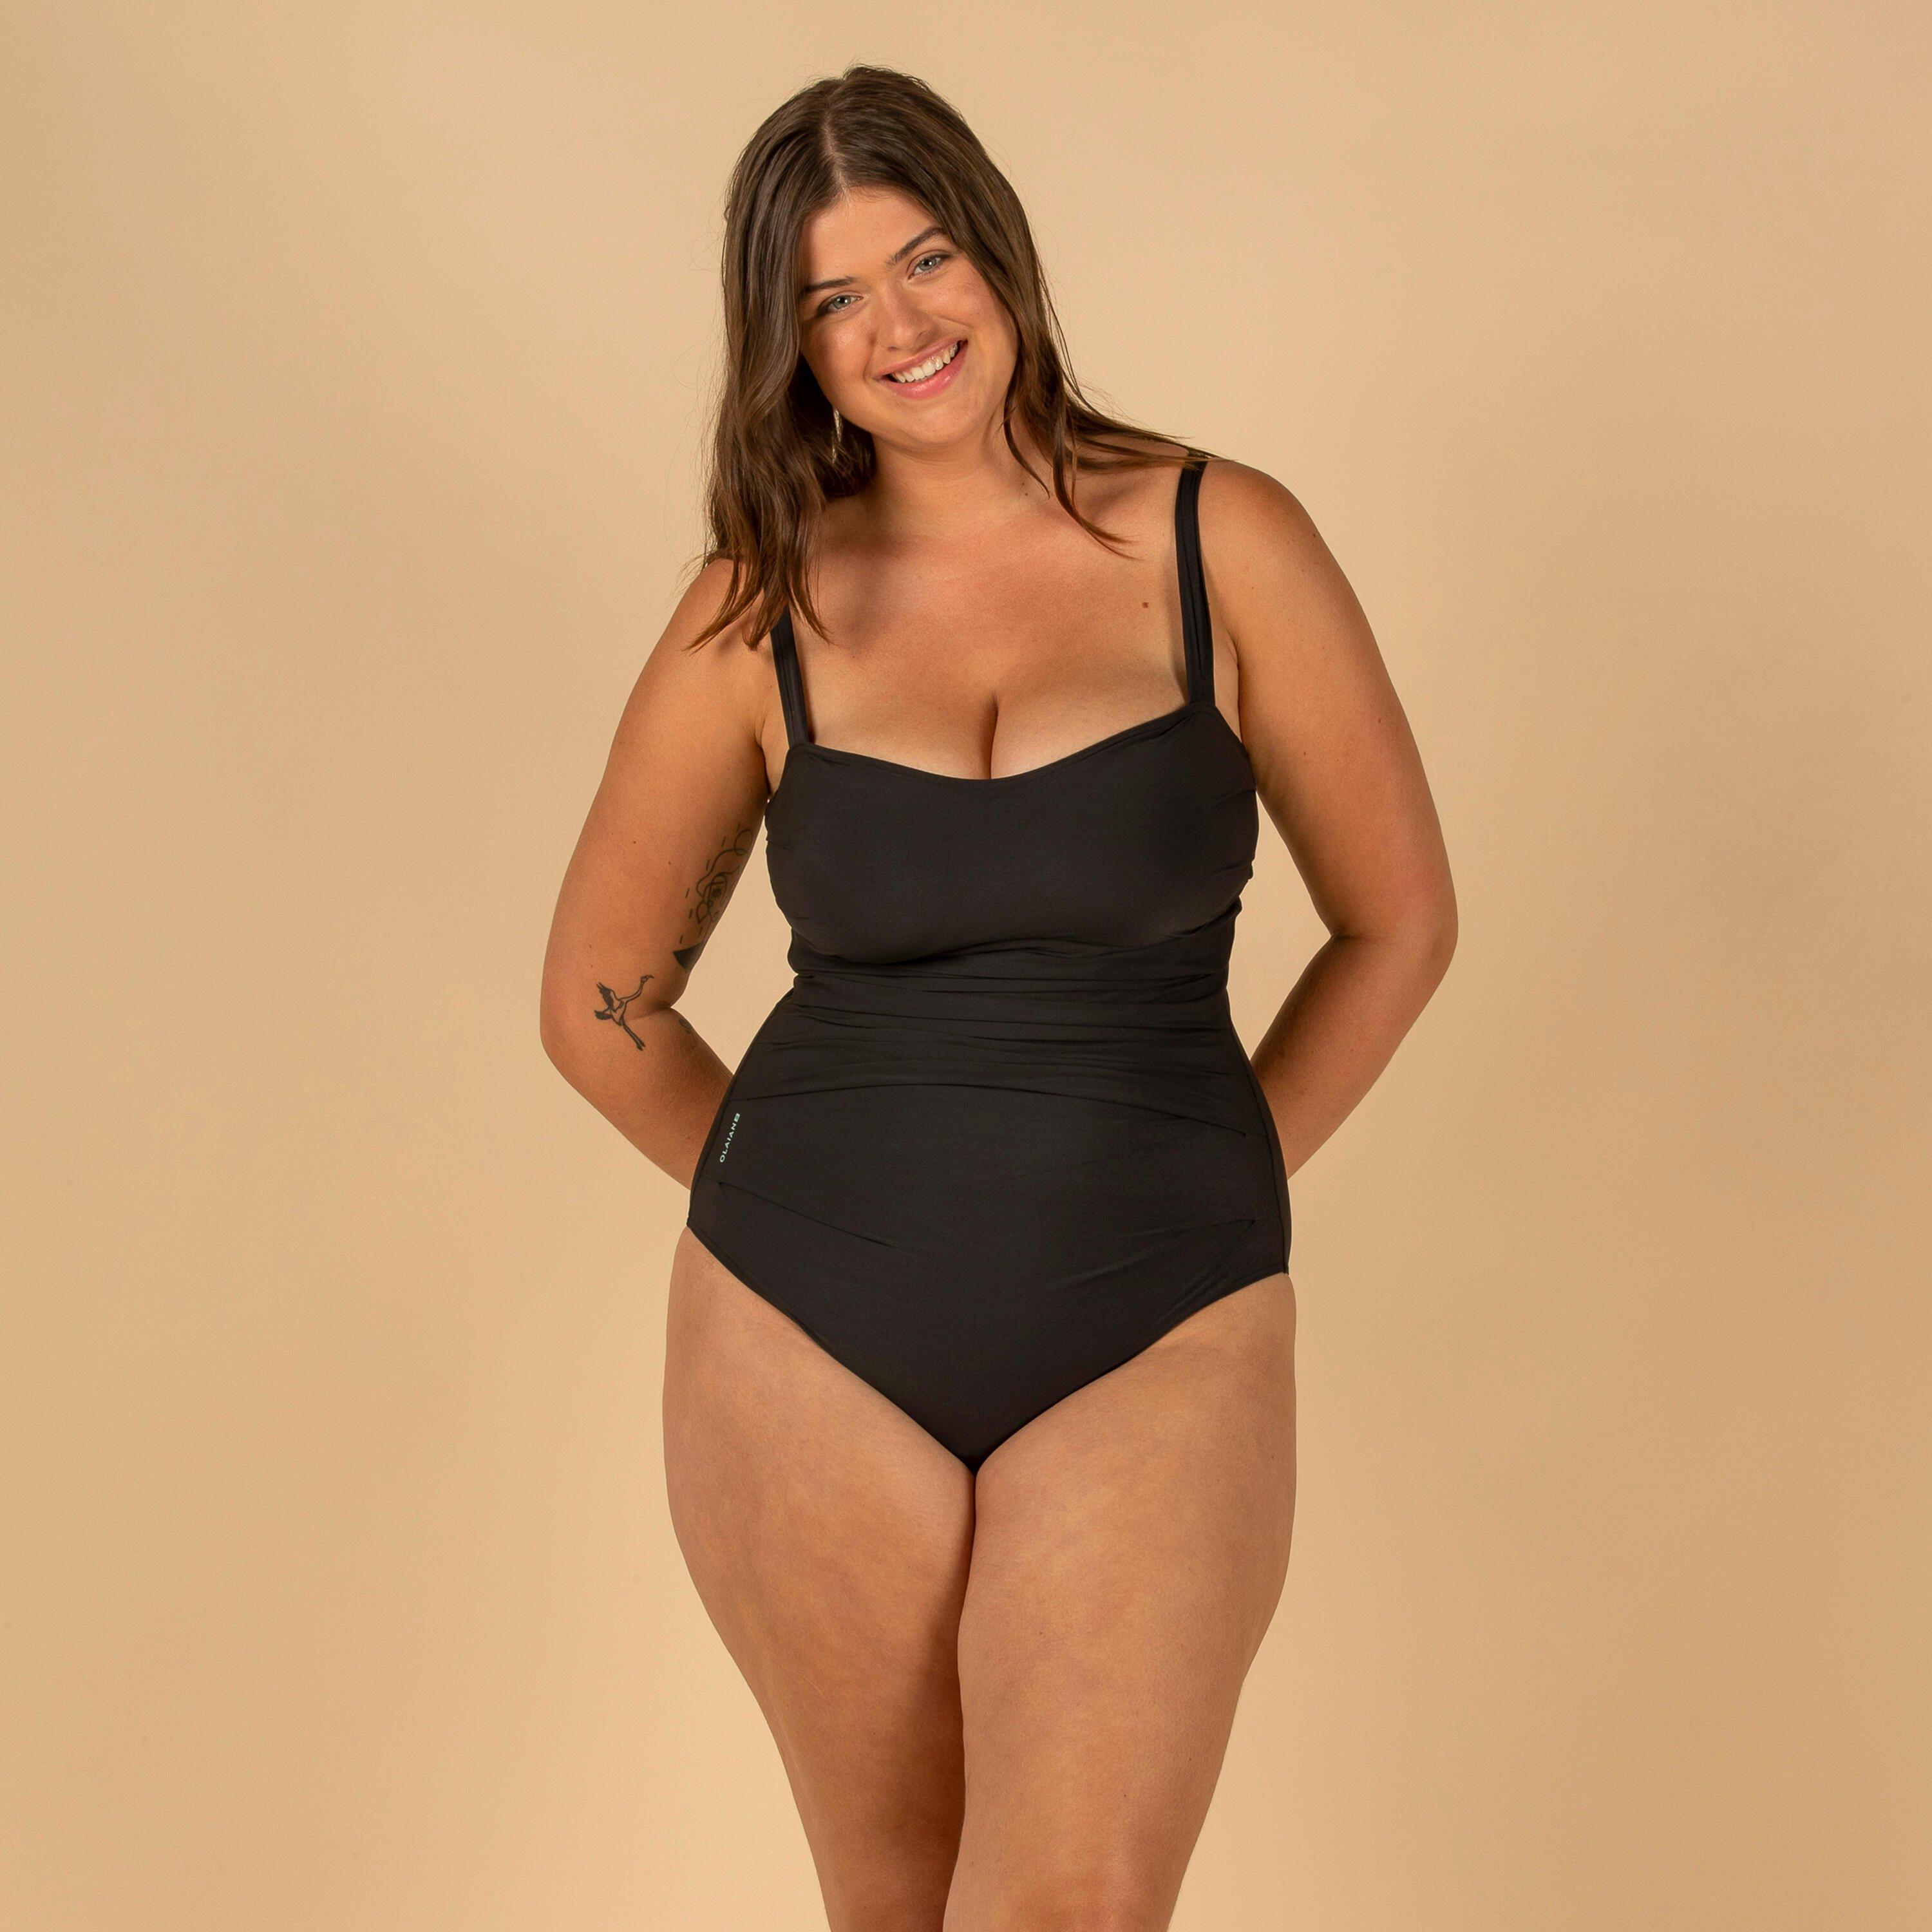 Decathlon Dora One-Piece Body-Sculpting Swimsuit With Flat Stomach Effect